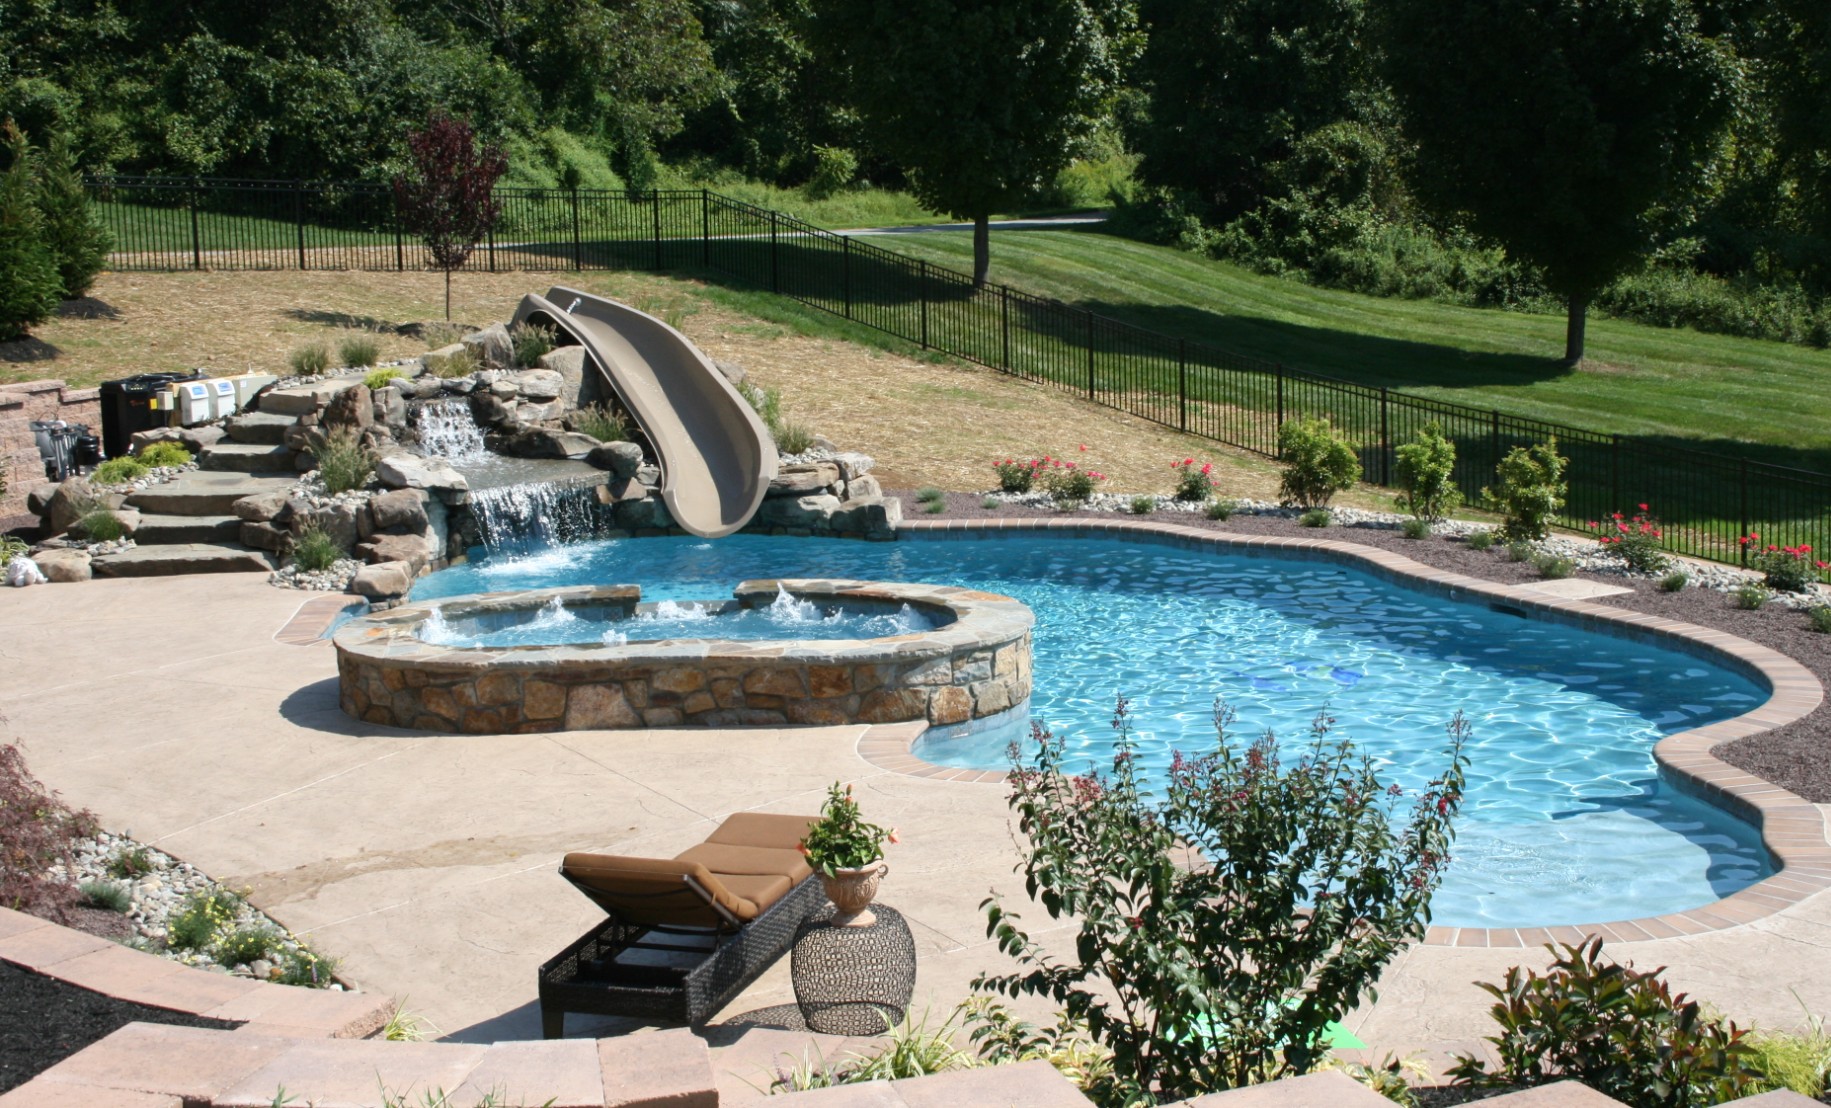 Top Methods For Keeping Your Pool Heated & Comfortable